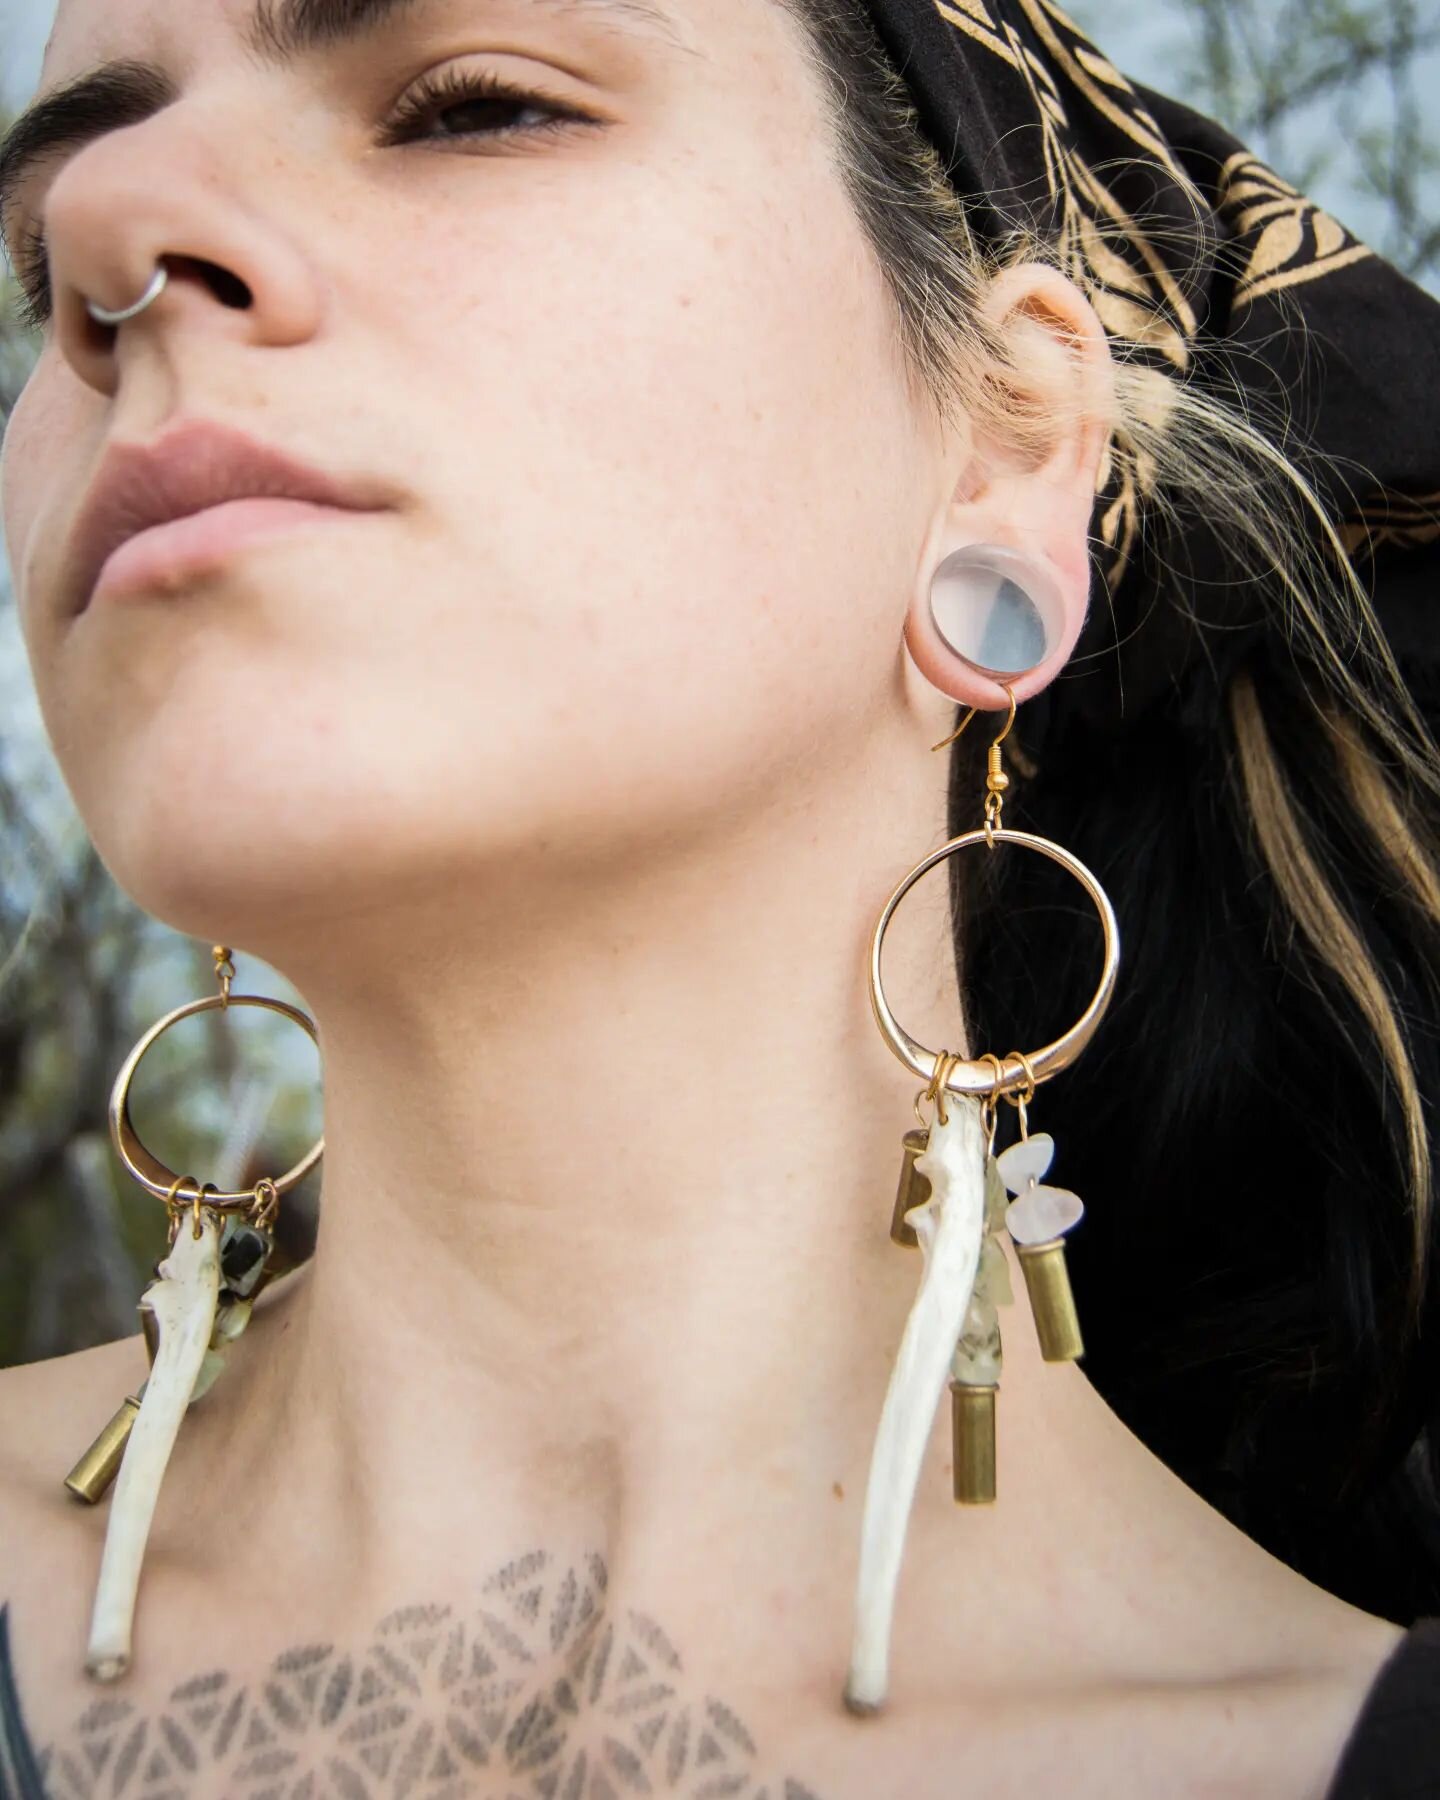 BULA ✨
Upcycled earrings made with desert-found bullet shell casings, opossum ulnas, prehnite, smoky and rose quartz.

Available now 🦷

#vultureculture #oddities #curioshop #animalbones #travelingartist